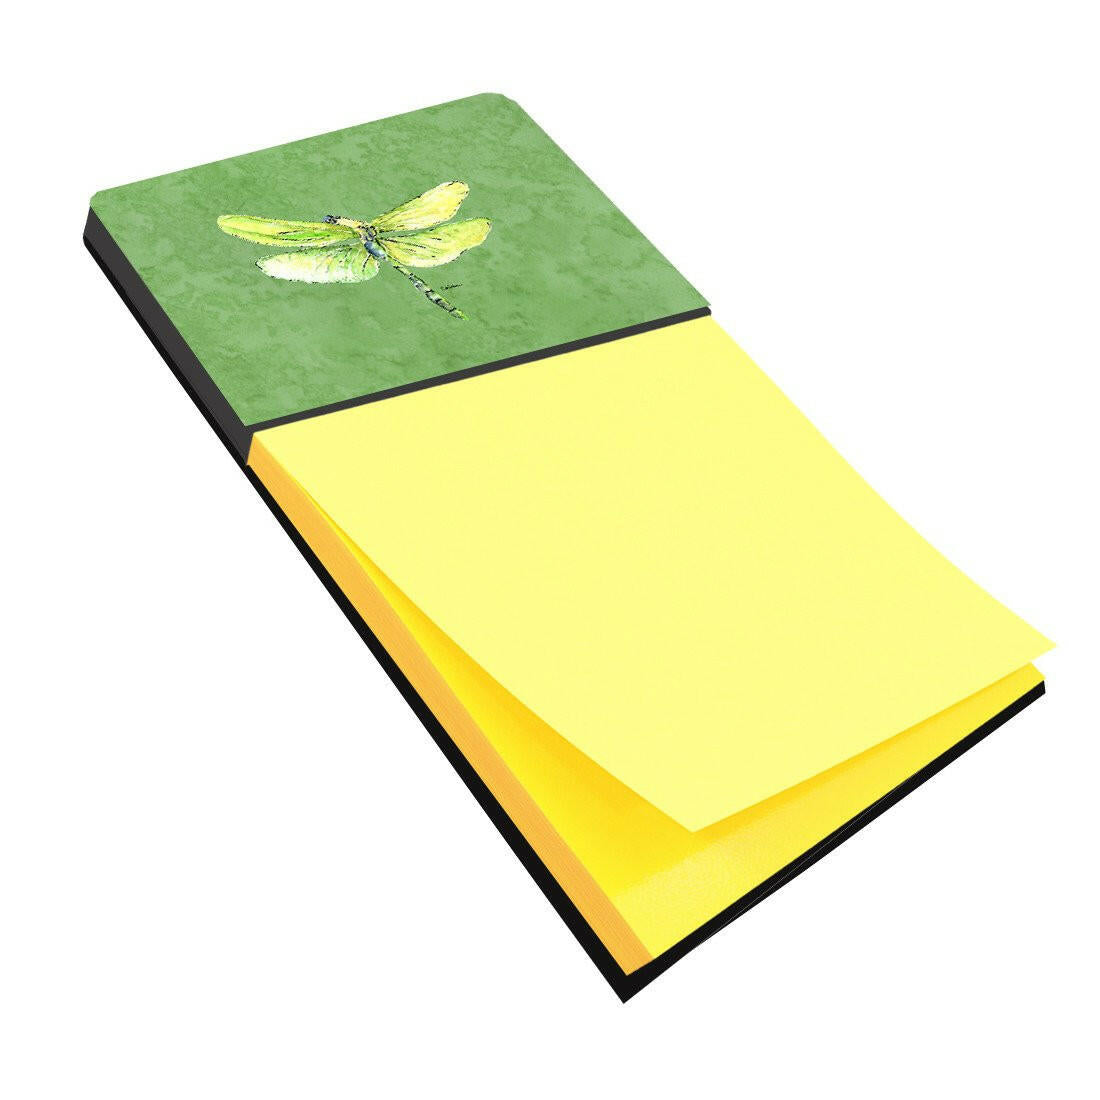 Dragonfly on Avacado Refiillable Sticky Note Holder or Postit Note Dispenser 8864SN by Caroline's Treasures